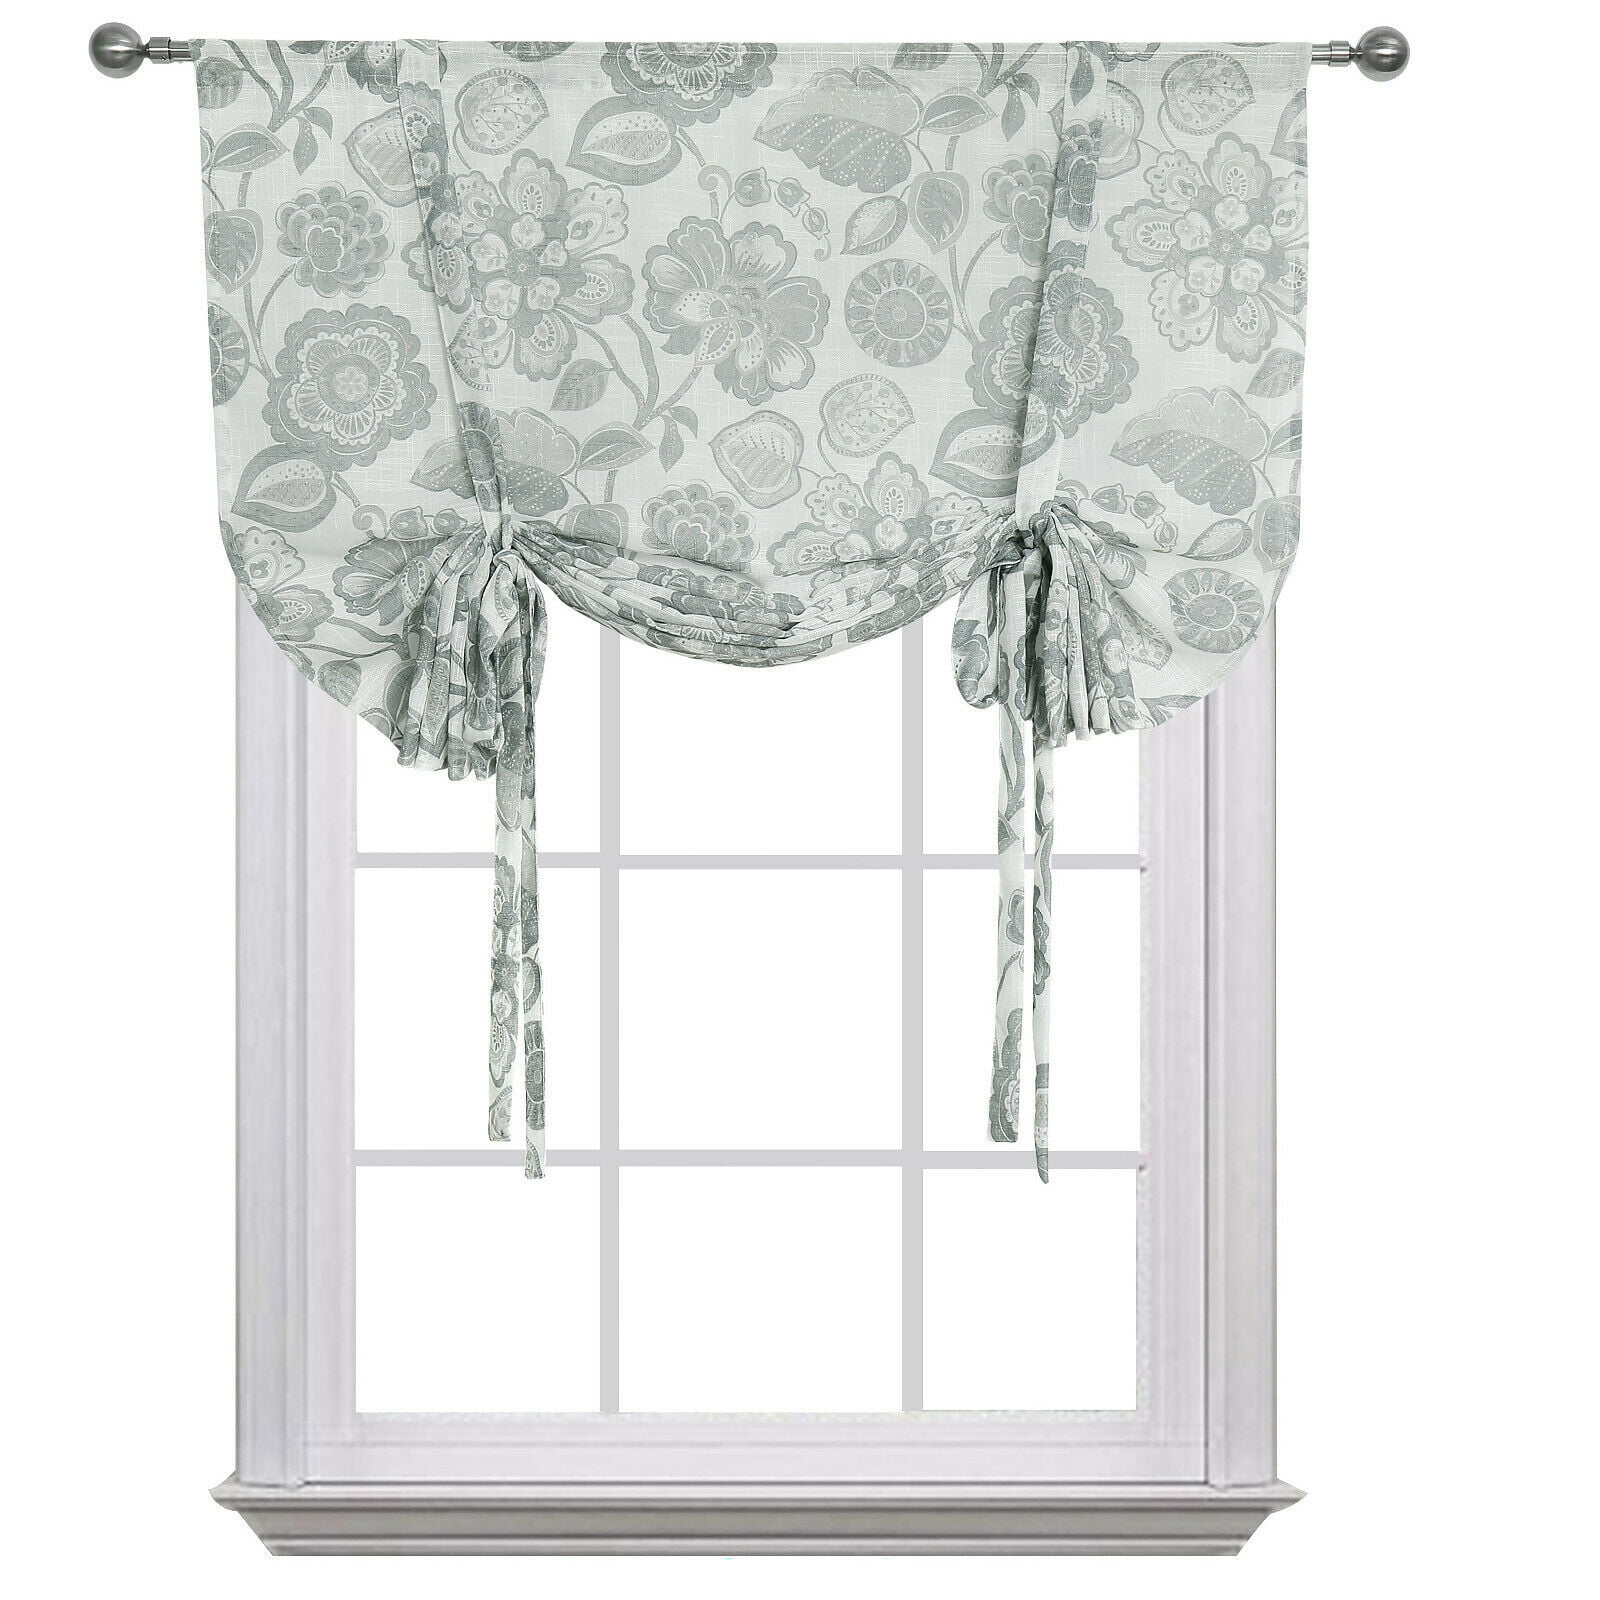 Shabby Flax Linen Trellis Clover Window Curtain Tie Up Shades Assorted Colors 